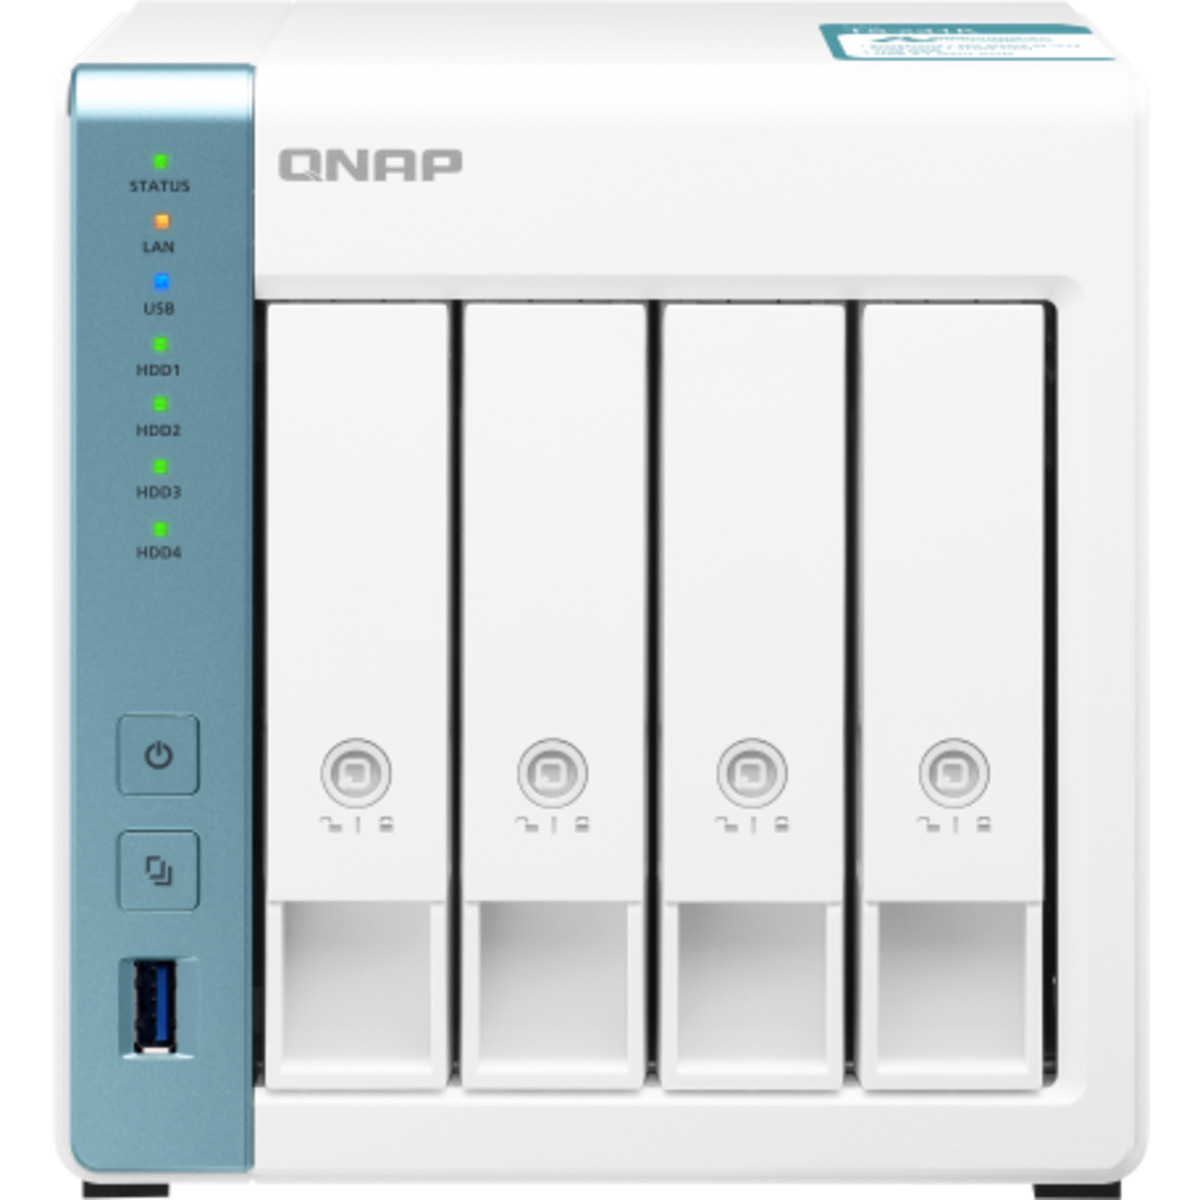 QNAP TS-431K 88tb 4-Bay Desktop Personal / Basic Home / Small Office NAS - Network Attached Storage Device 4x22tb Western Digital Ultrastar HC570 WUH722222ALE6L4 3.5 7200rpm SATA 6Gb/s HDD ENTERPRISE Class Drives Installed - Burn-In Tested TS-431K